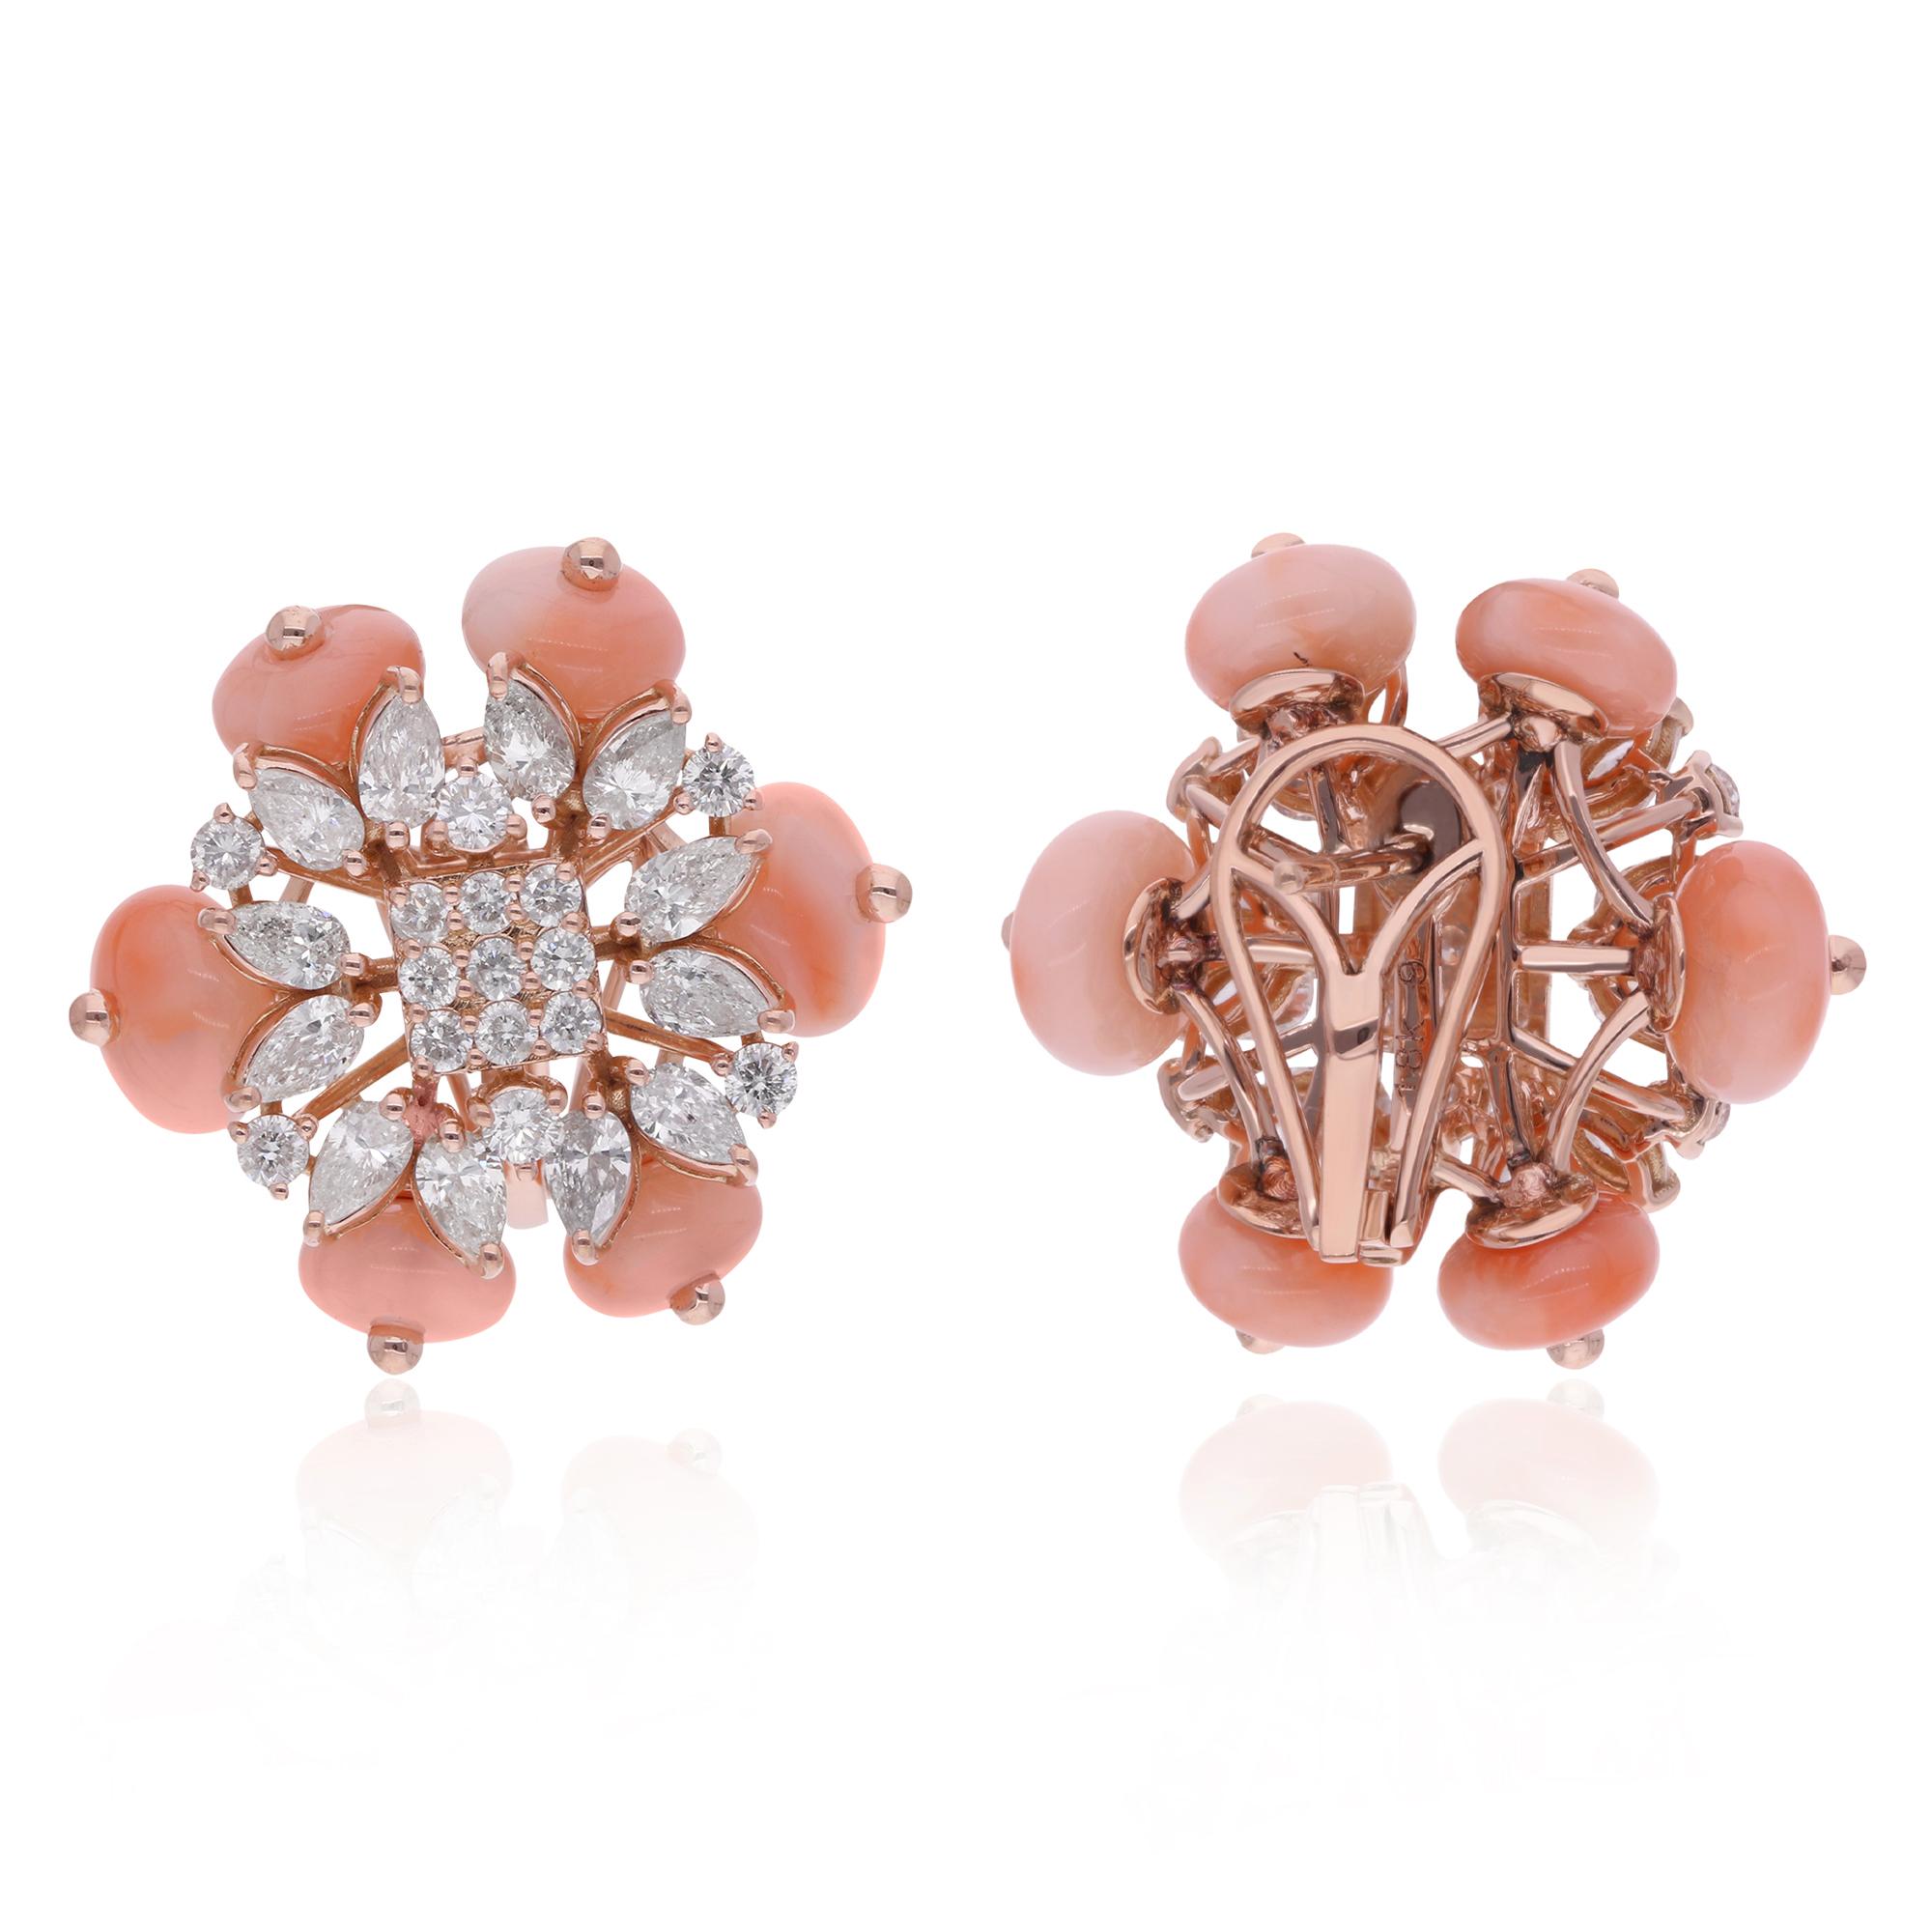 Accentuating the Coral gemstones are brilliant round diamonds, meticulously set to enhance their brilliance and fire. The diamonds add a captivating sparkle to the earrings, creating a mesmerizing interplay of light and color. Set against the